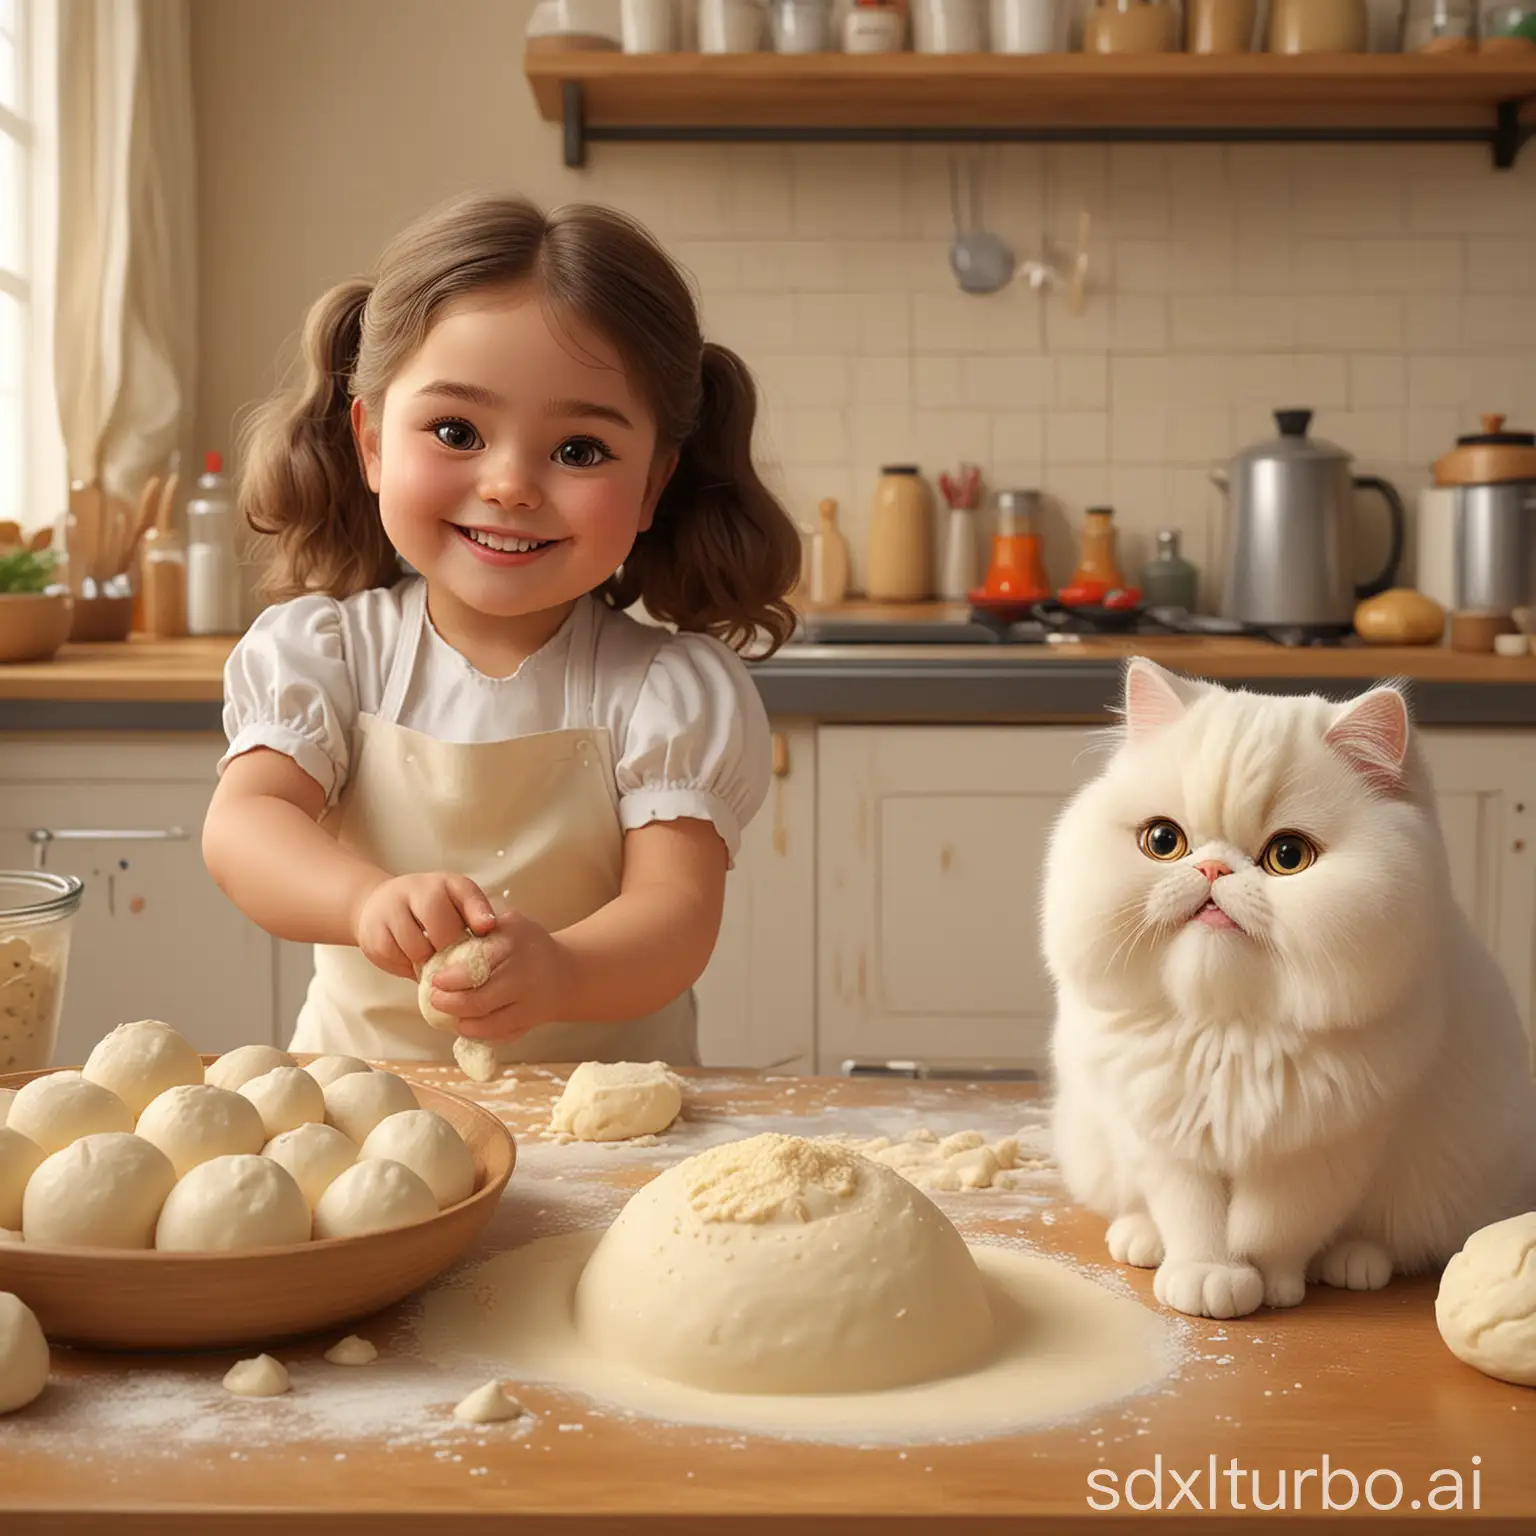 cartoon 4D super realistic 16k, image of a chubby little girl making dough, next to her there's a plump Persian cat sitting beside her with a happy smiling face, minimalist kitchen background